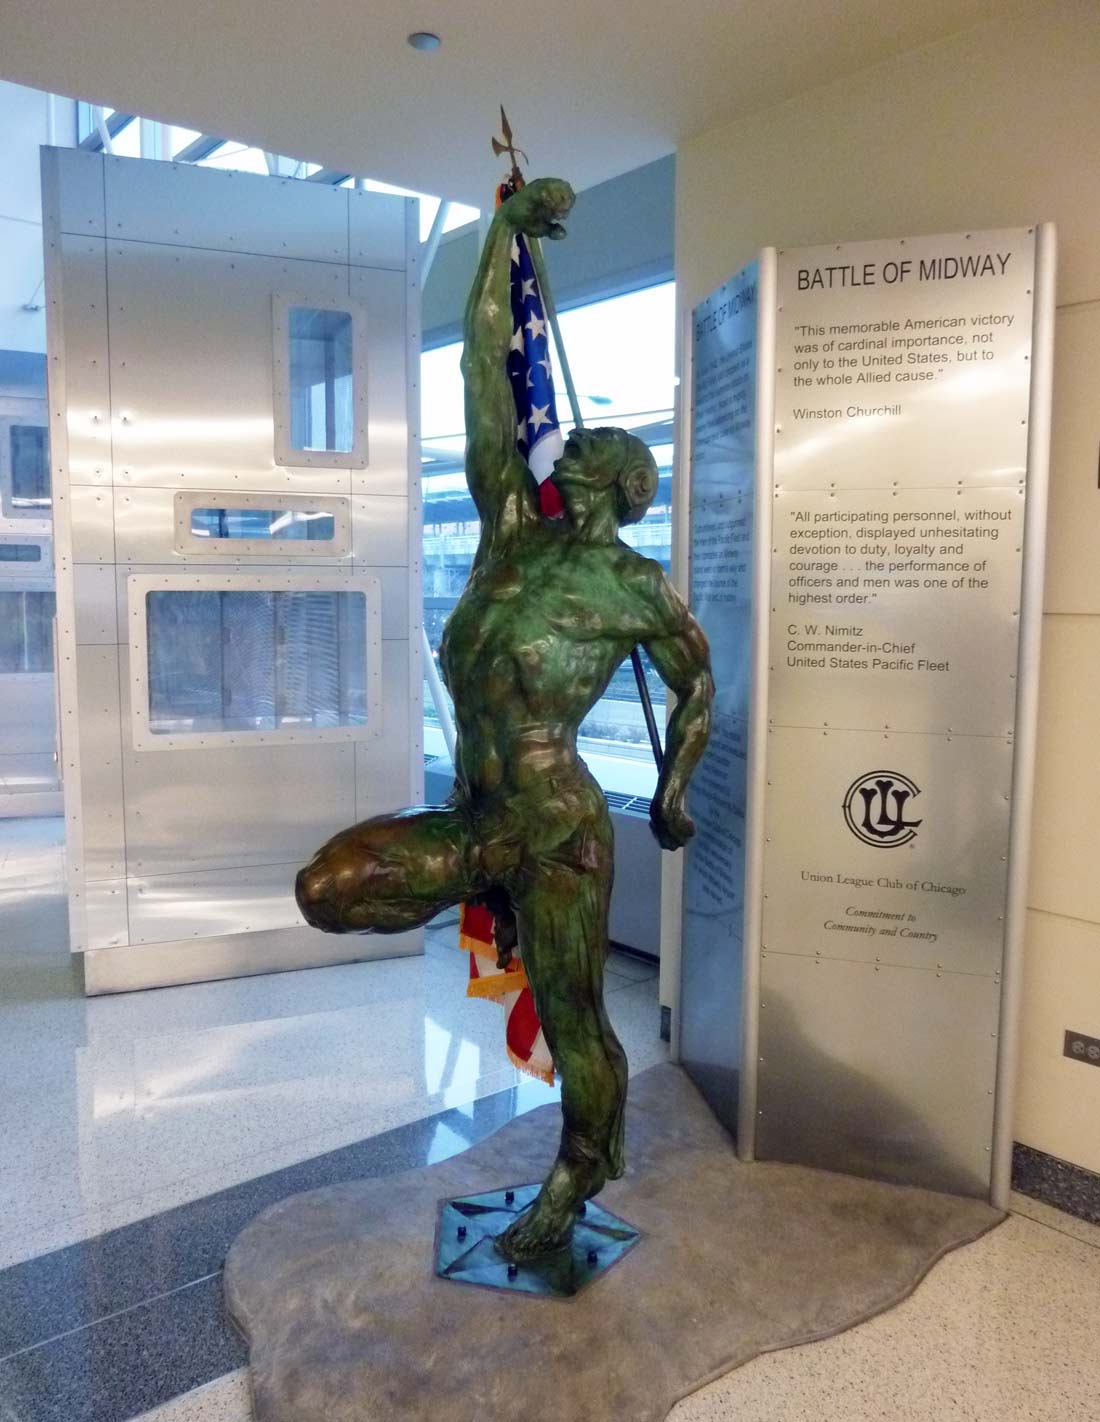 “America,” Midway Airport, Chicago, Illinois, 1993. Gary Weisman, sculptor. Photograph by author.